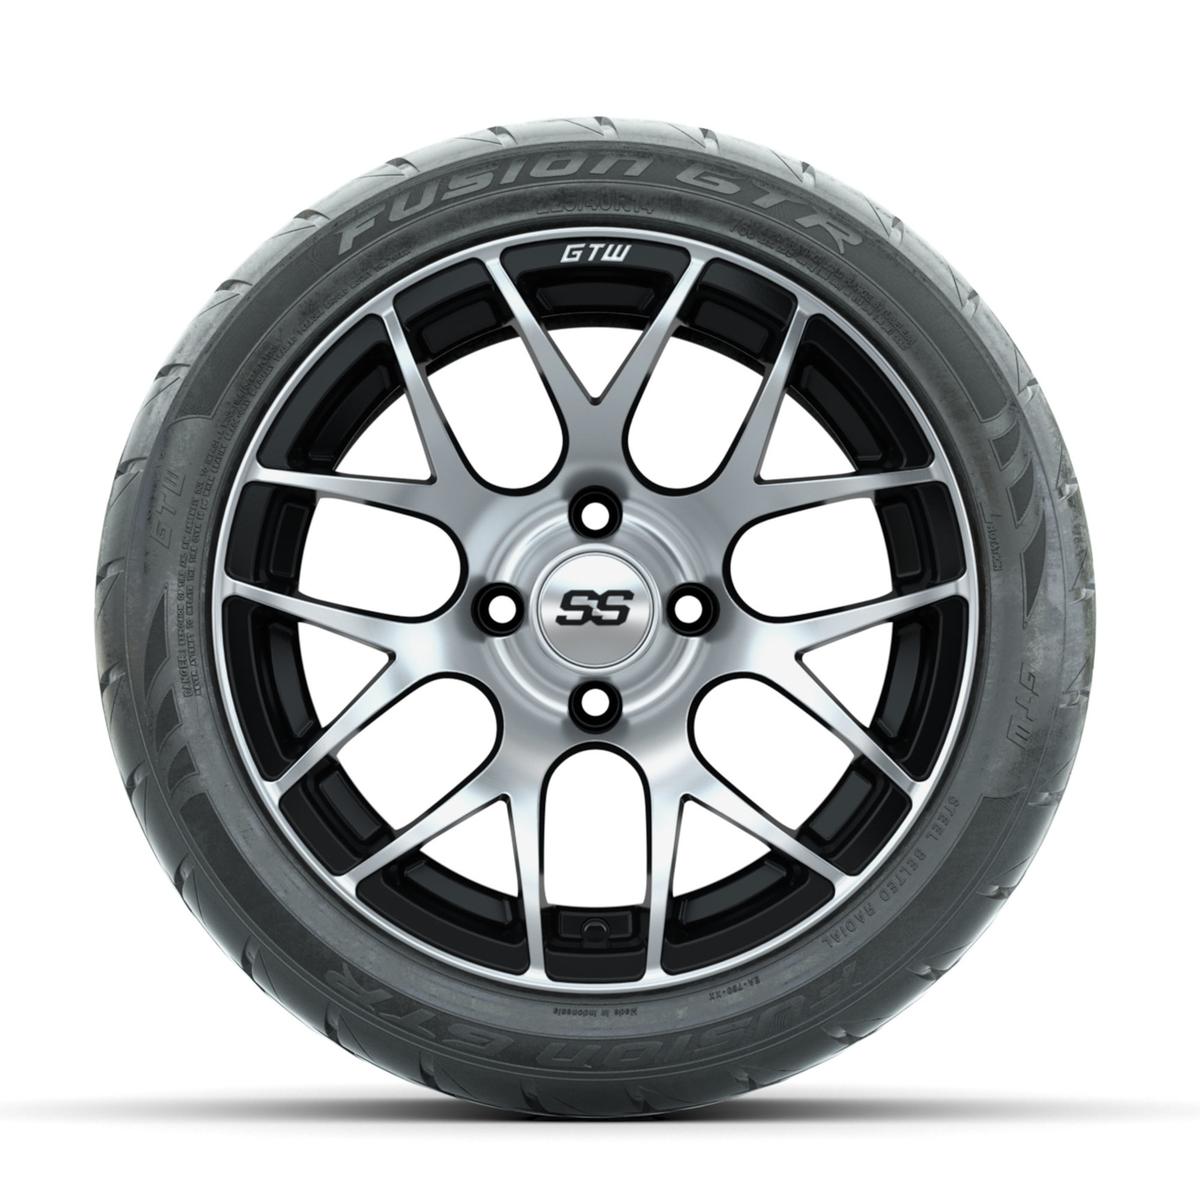 GTW Pursuit Machined/Black 14 in Wheels with 225/40-R14 Fusion GTR Street Tires – Full Set